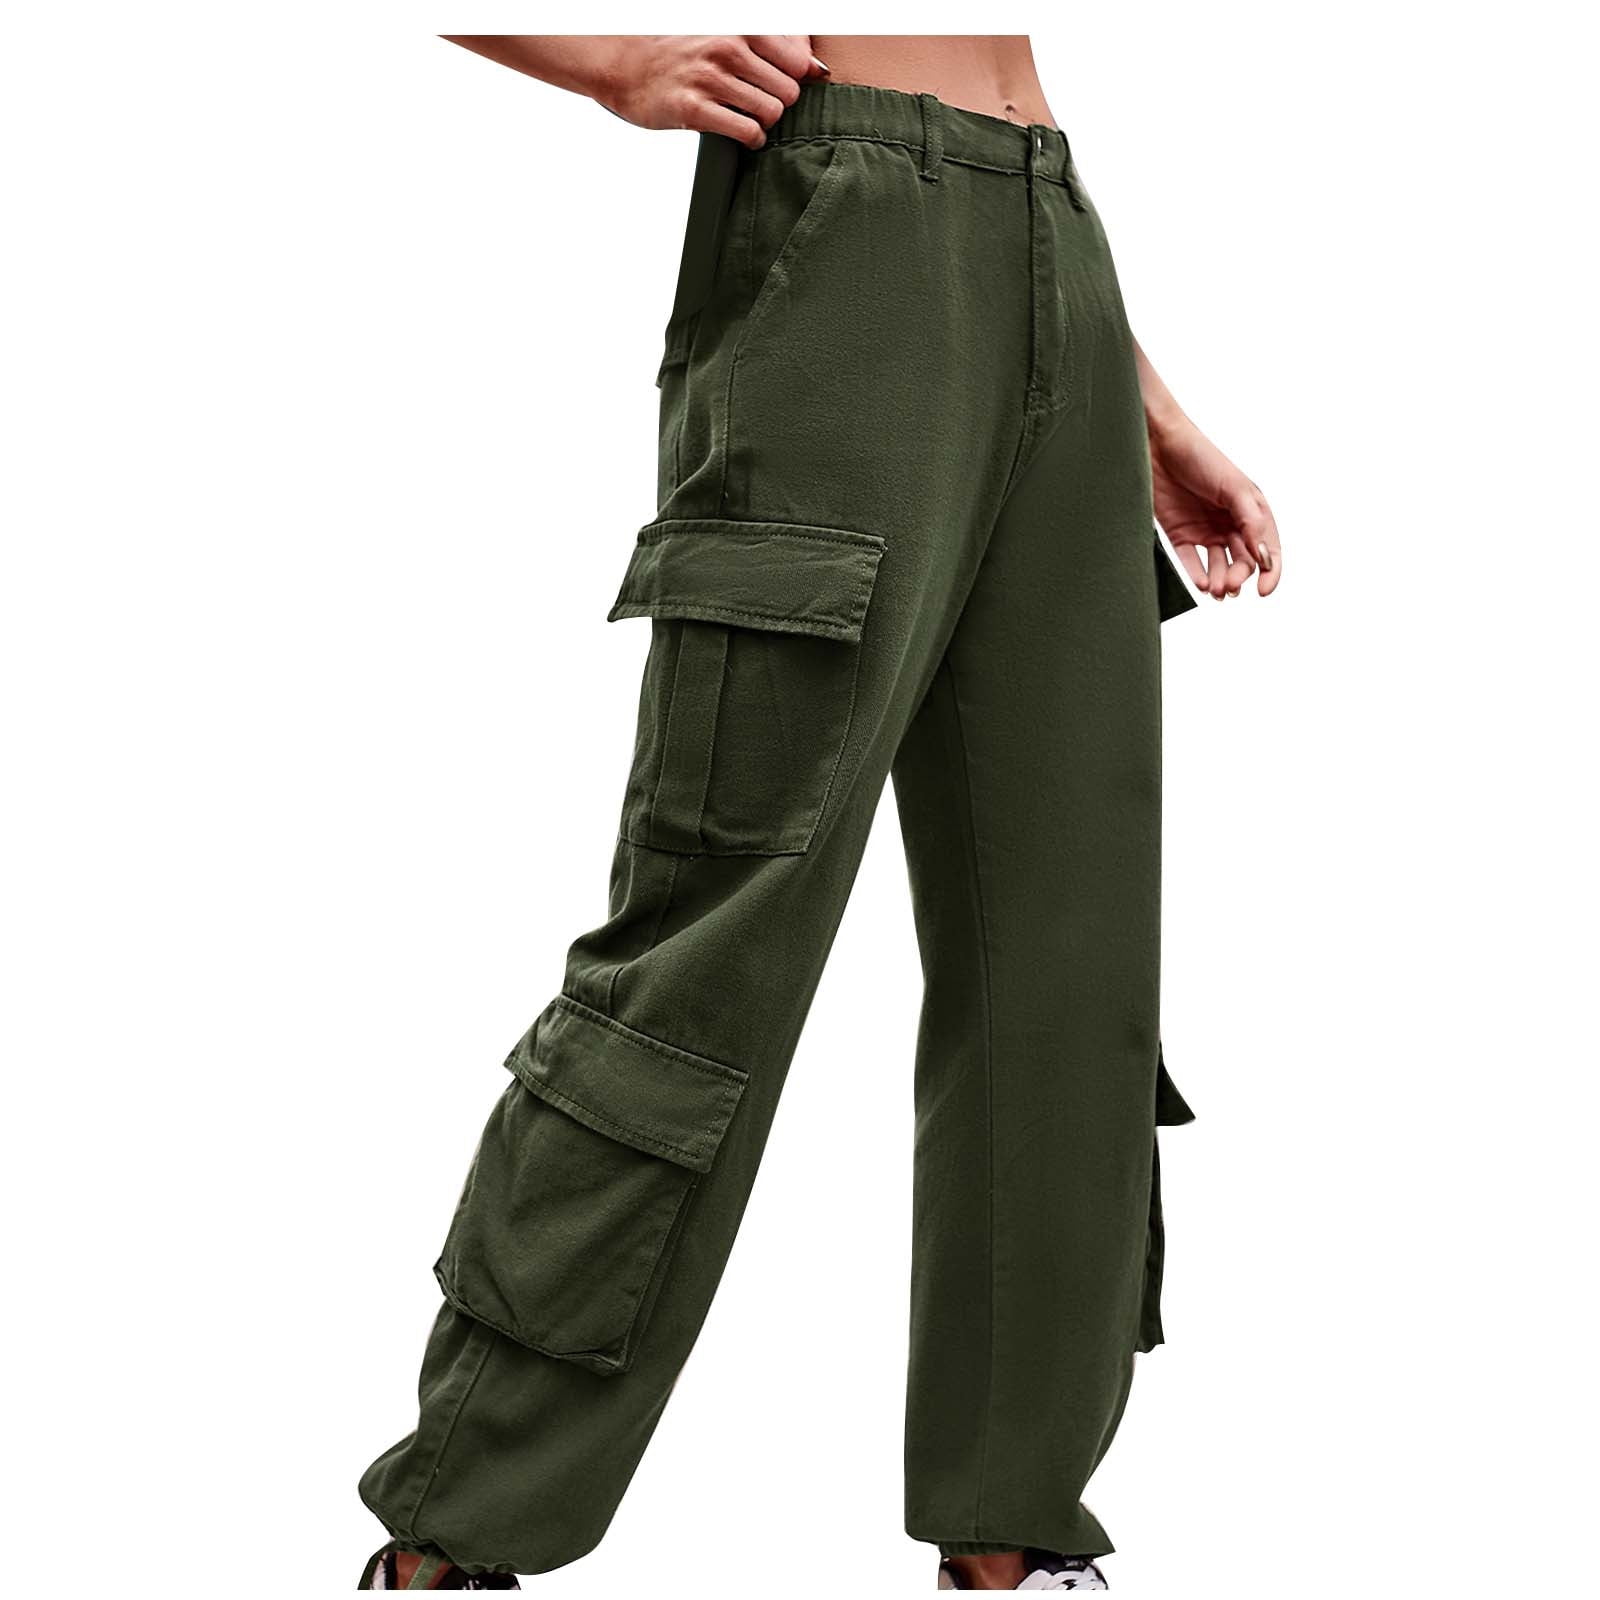 Womens Autumn Style Casual Cargo Jogger Pants  Cargo pants women, Pants  for women, Overalls pants